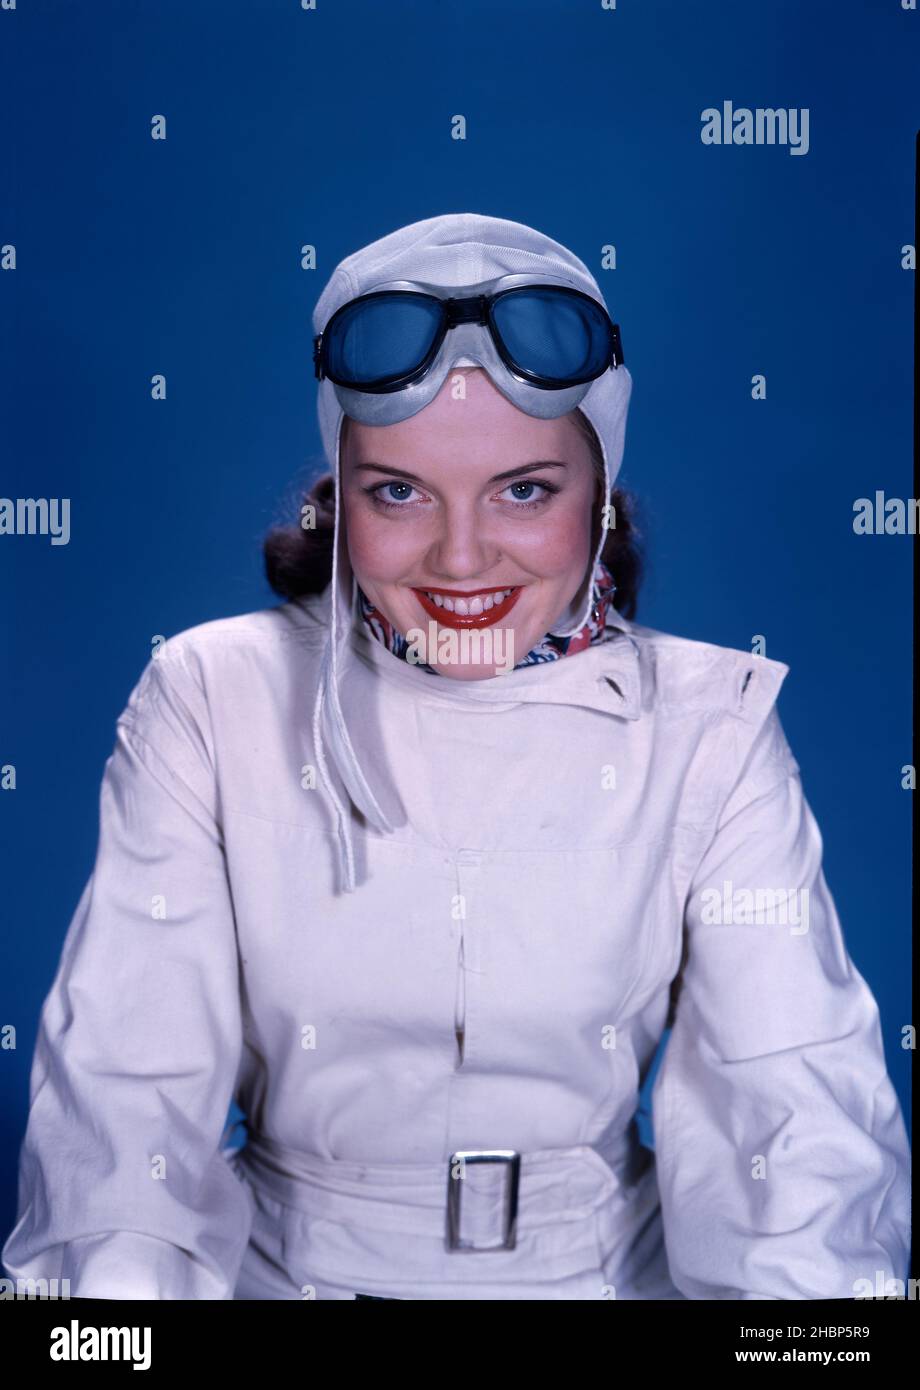 Teen girl posed in white aviation outfit with aviator hat and goggles Stock Photo